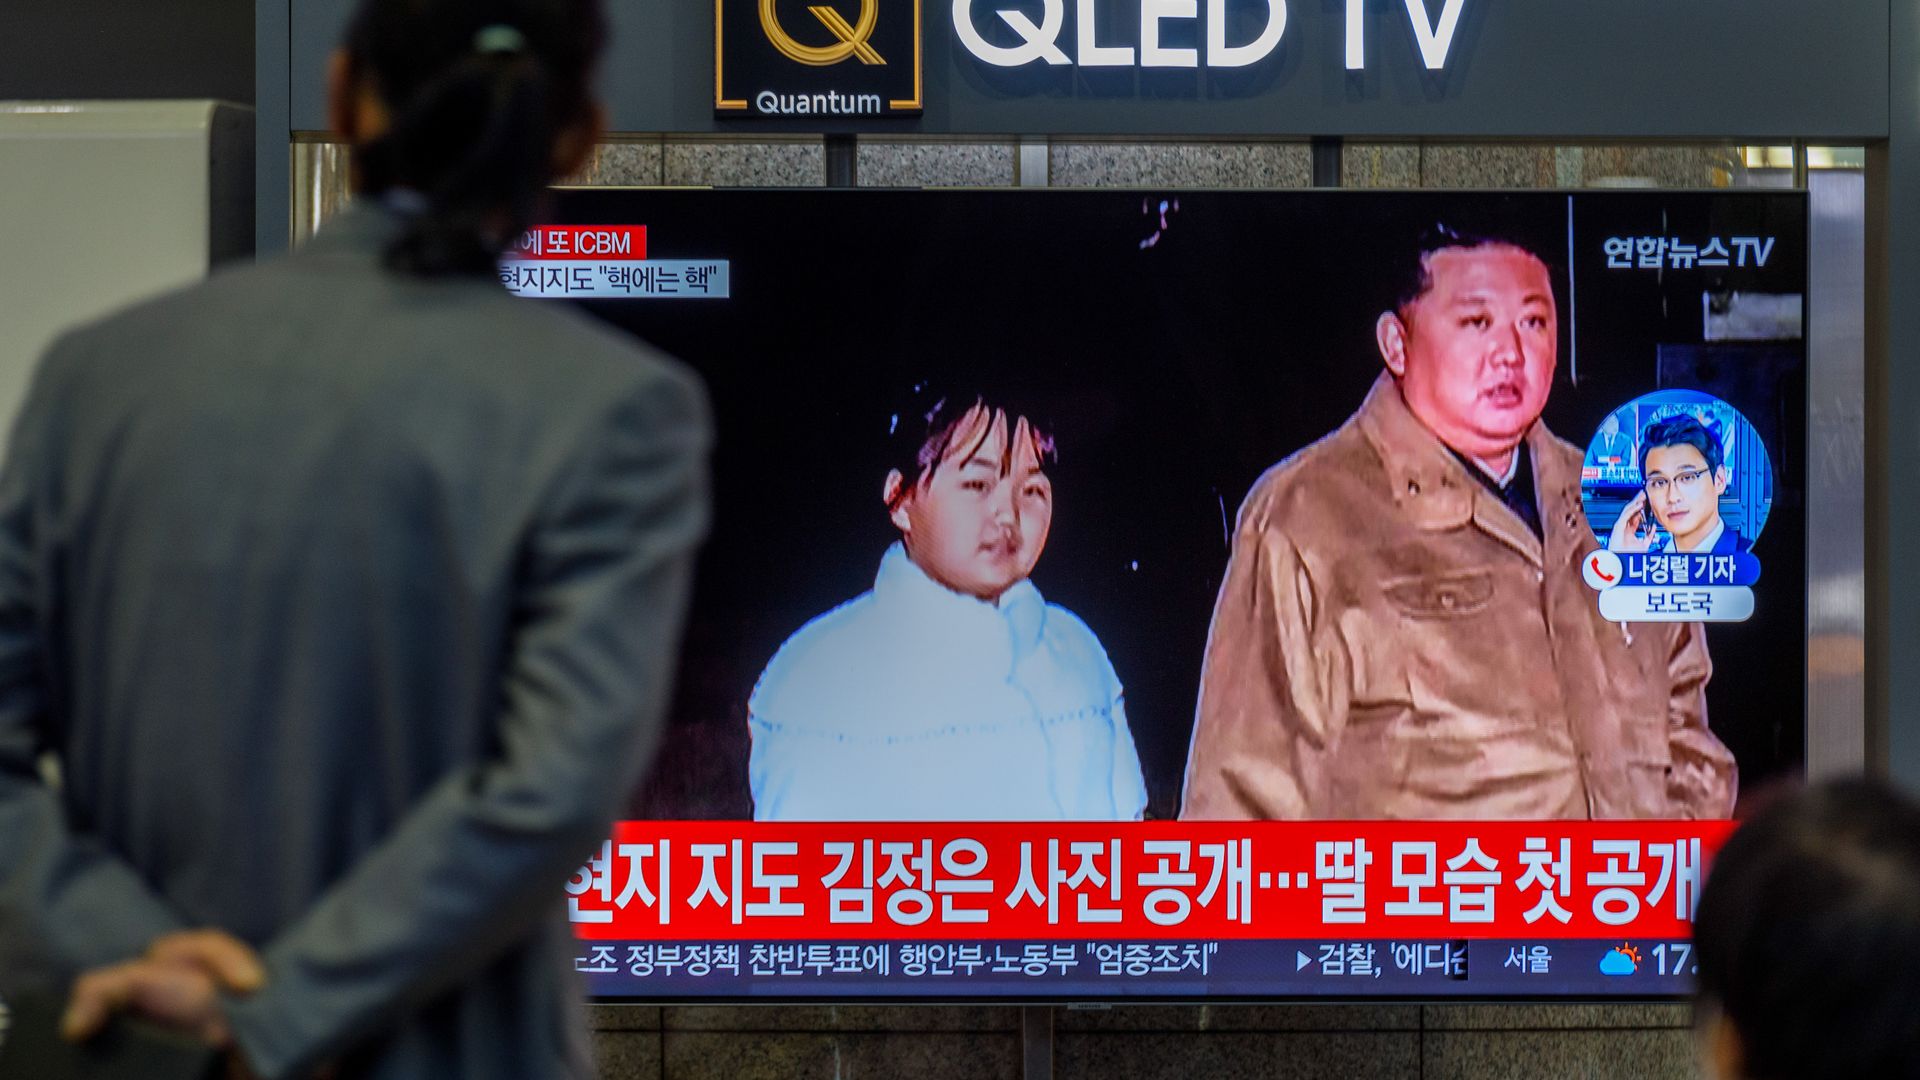 A TV screen shows North Korea's KCNA released a picture of North Korean leader Kim Jong Un and his daughter Kim Chu-ae.